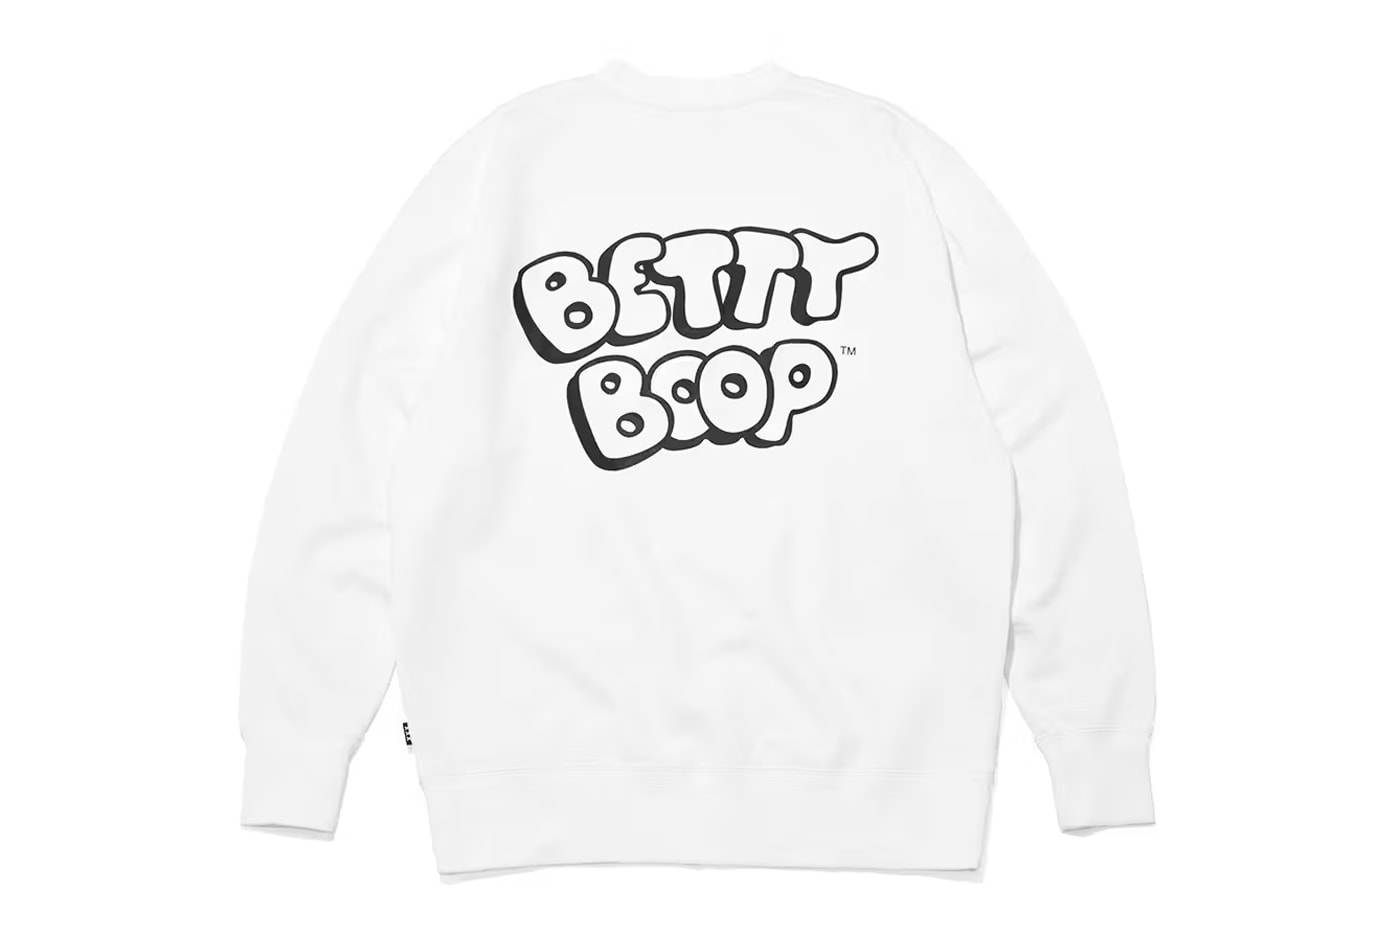 god selection xxx betty boop collaboration crewneck sweatshirt hoodie t shirt sex official release date info phots price store list buying guide 